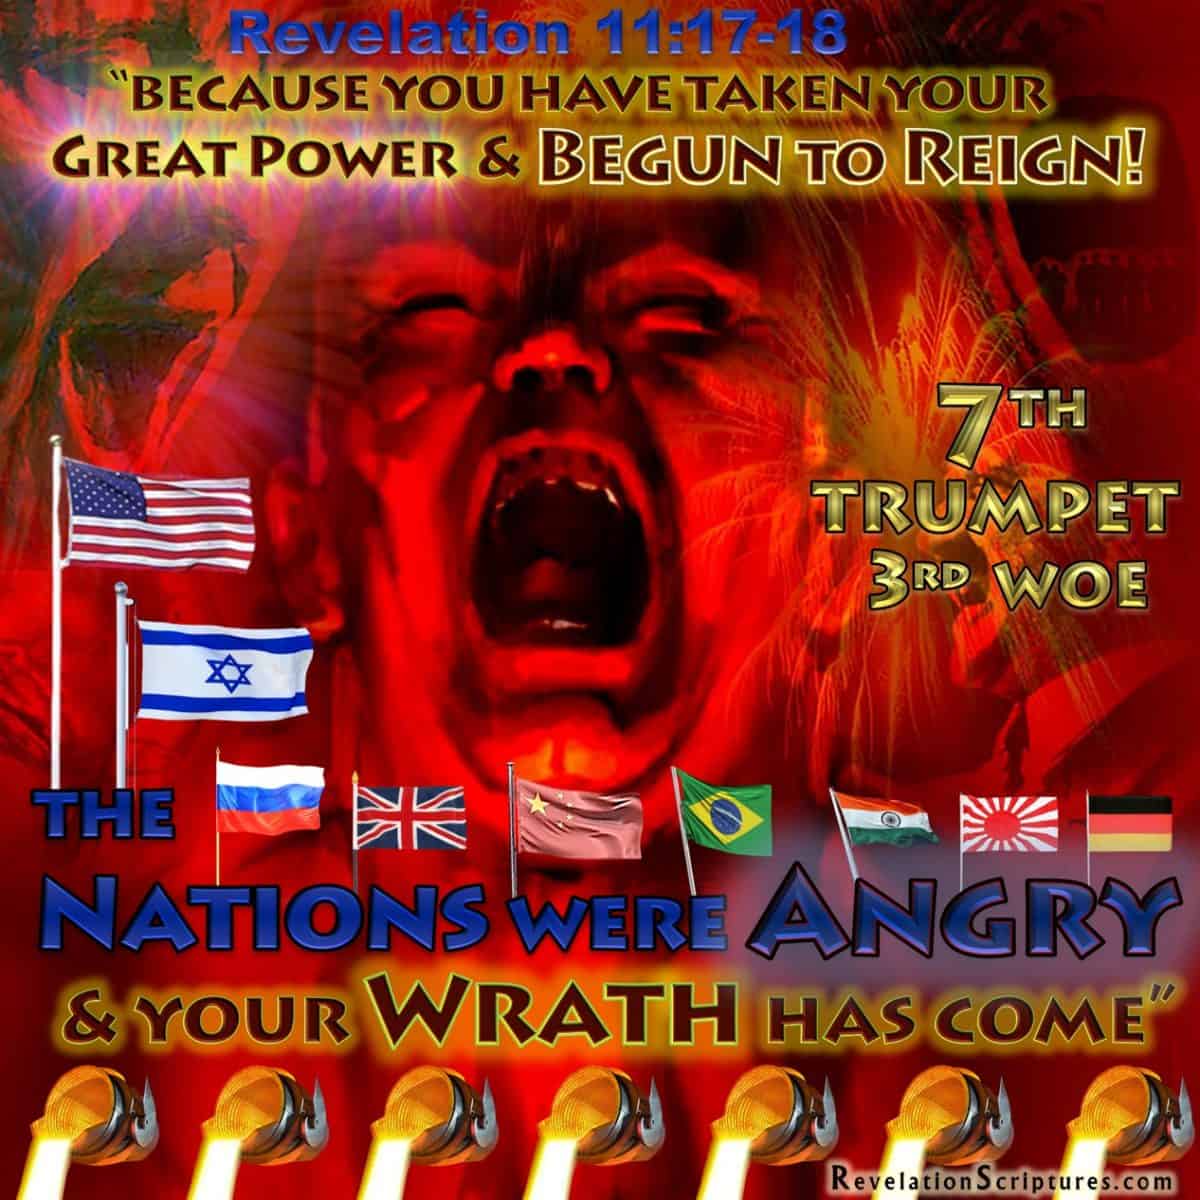 your wrath has come,the time of your wrath has come,your wrath came,Your wrath came,thy wrath is come,the nations were angry,The nations raged,nations were filled with wrath,The nations were angry,you have taken your great power and begun to reign,You have taken Your great power and reigned,We give thee thanks O Lord God Almighty,Seventh Trumpet,7th Trumpet,Third Woe,God's Temple,Heaven,Ark,Ark of the Covenant,Earthquake,Great Hail,Hail,Heavy Hail,Begun to Reign,Nations Angry,Wrath,Wrath has come,Reward,Judg Dead,time to reward,time to judge the dead,Book of Revelation,Revelation Chapter 11,Apocalypse,scriptural interpretation,biblical interpretation,food in due season,kingdom of world,kingdom of Christ,kingdom,birth of Kingdom,start of kingdom,destroy those ruining the earth,destroy the destroyers of the earth,7 bowls of Wrath,7 vials of Wrath,day of wrath,day of vengeance,day of the lord,revelation,saints,prophets,great and small,those who fear your name,we give you thanks,we give thanks to you Lord God Almighty,